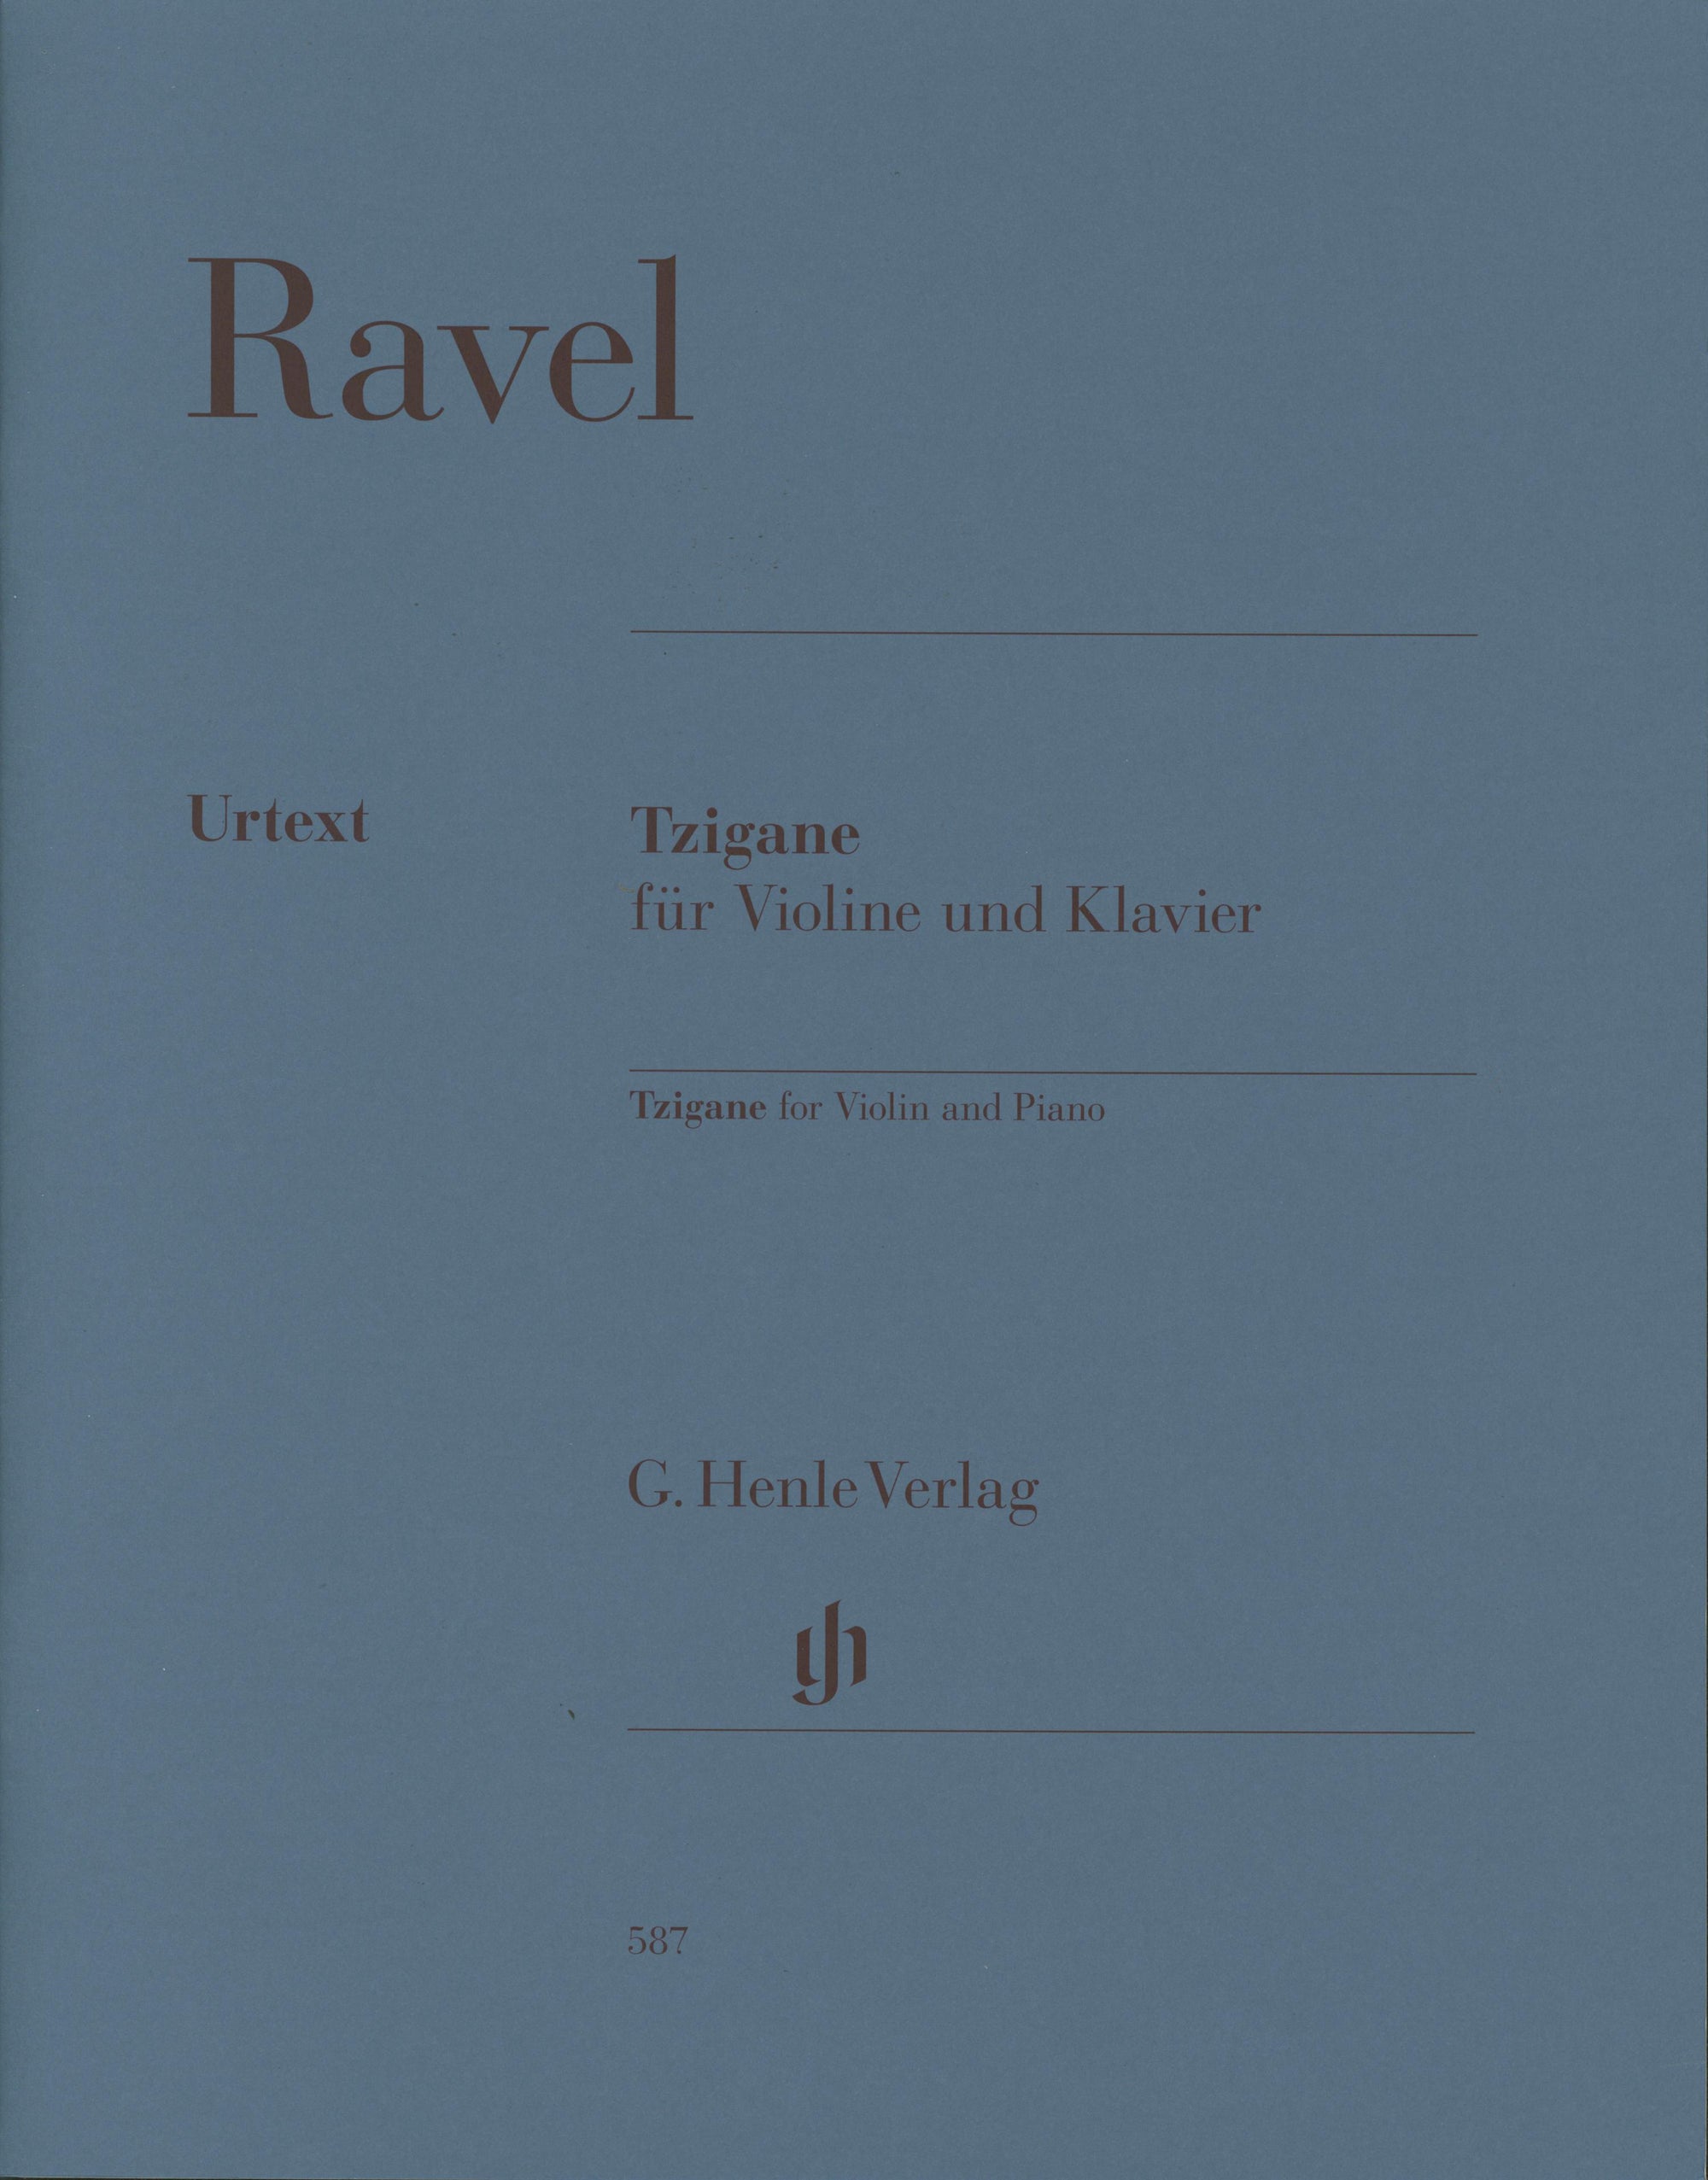 Ravel: Tzigane (Version for Violin & Piano)